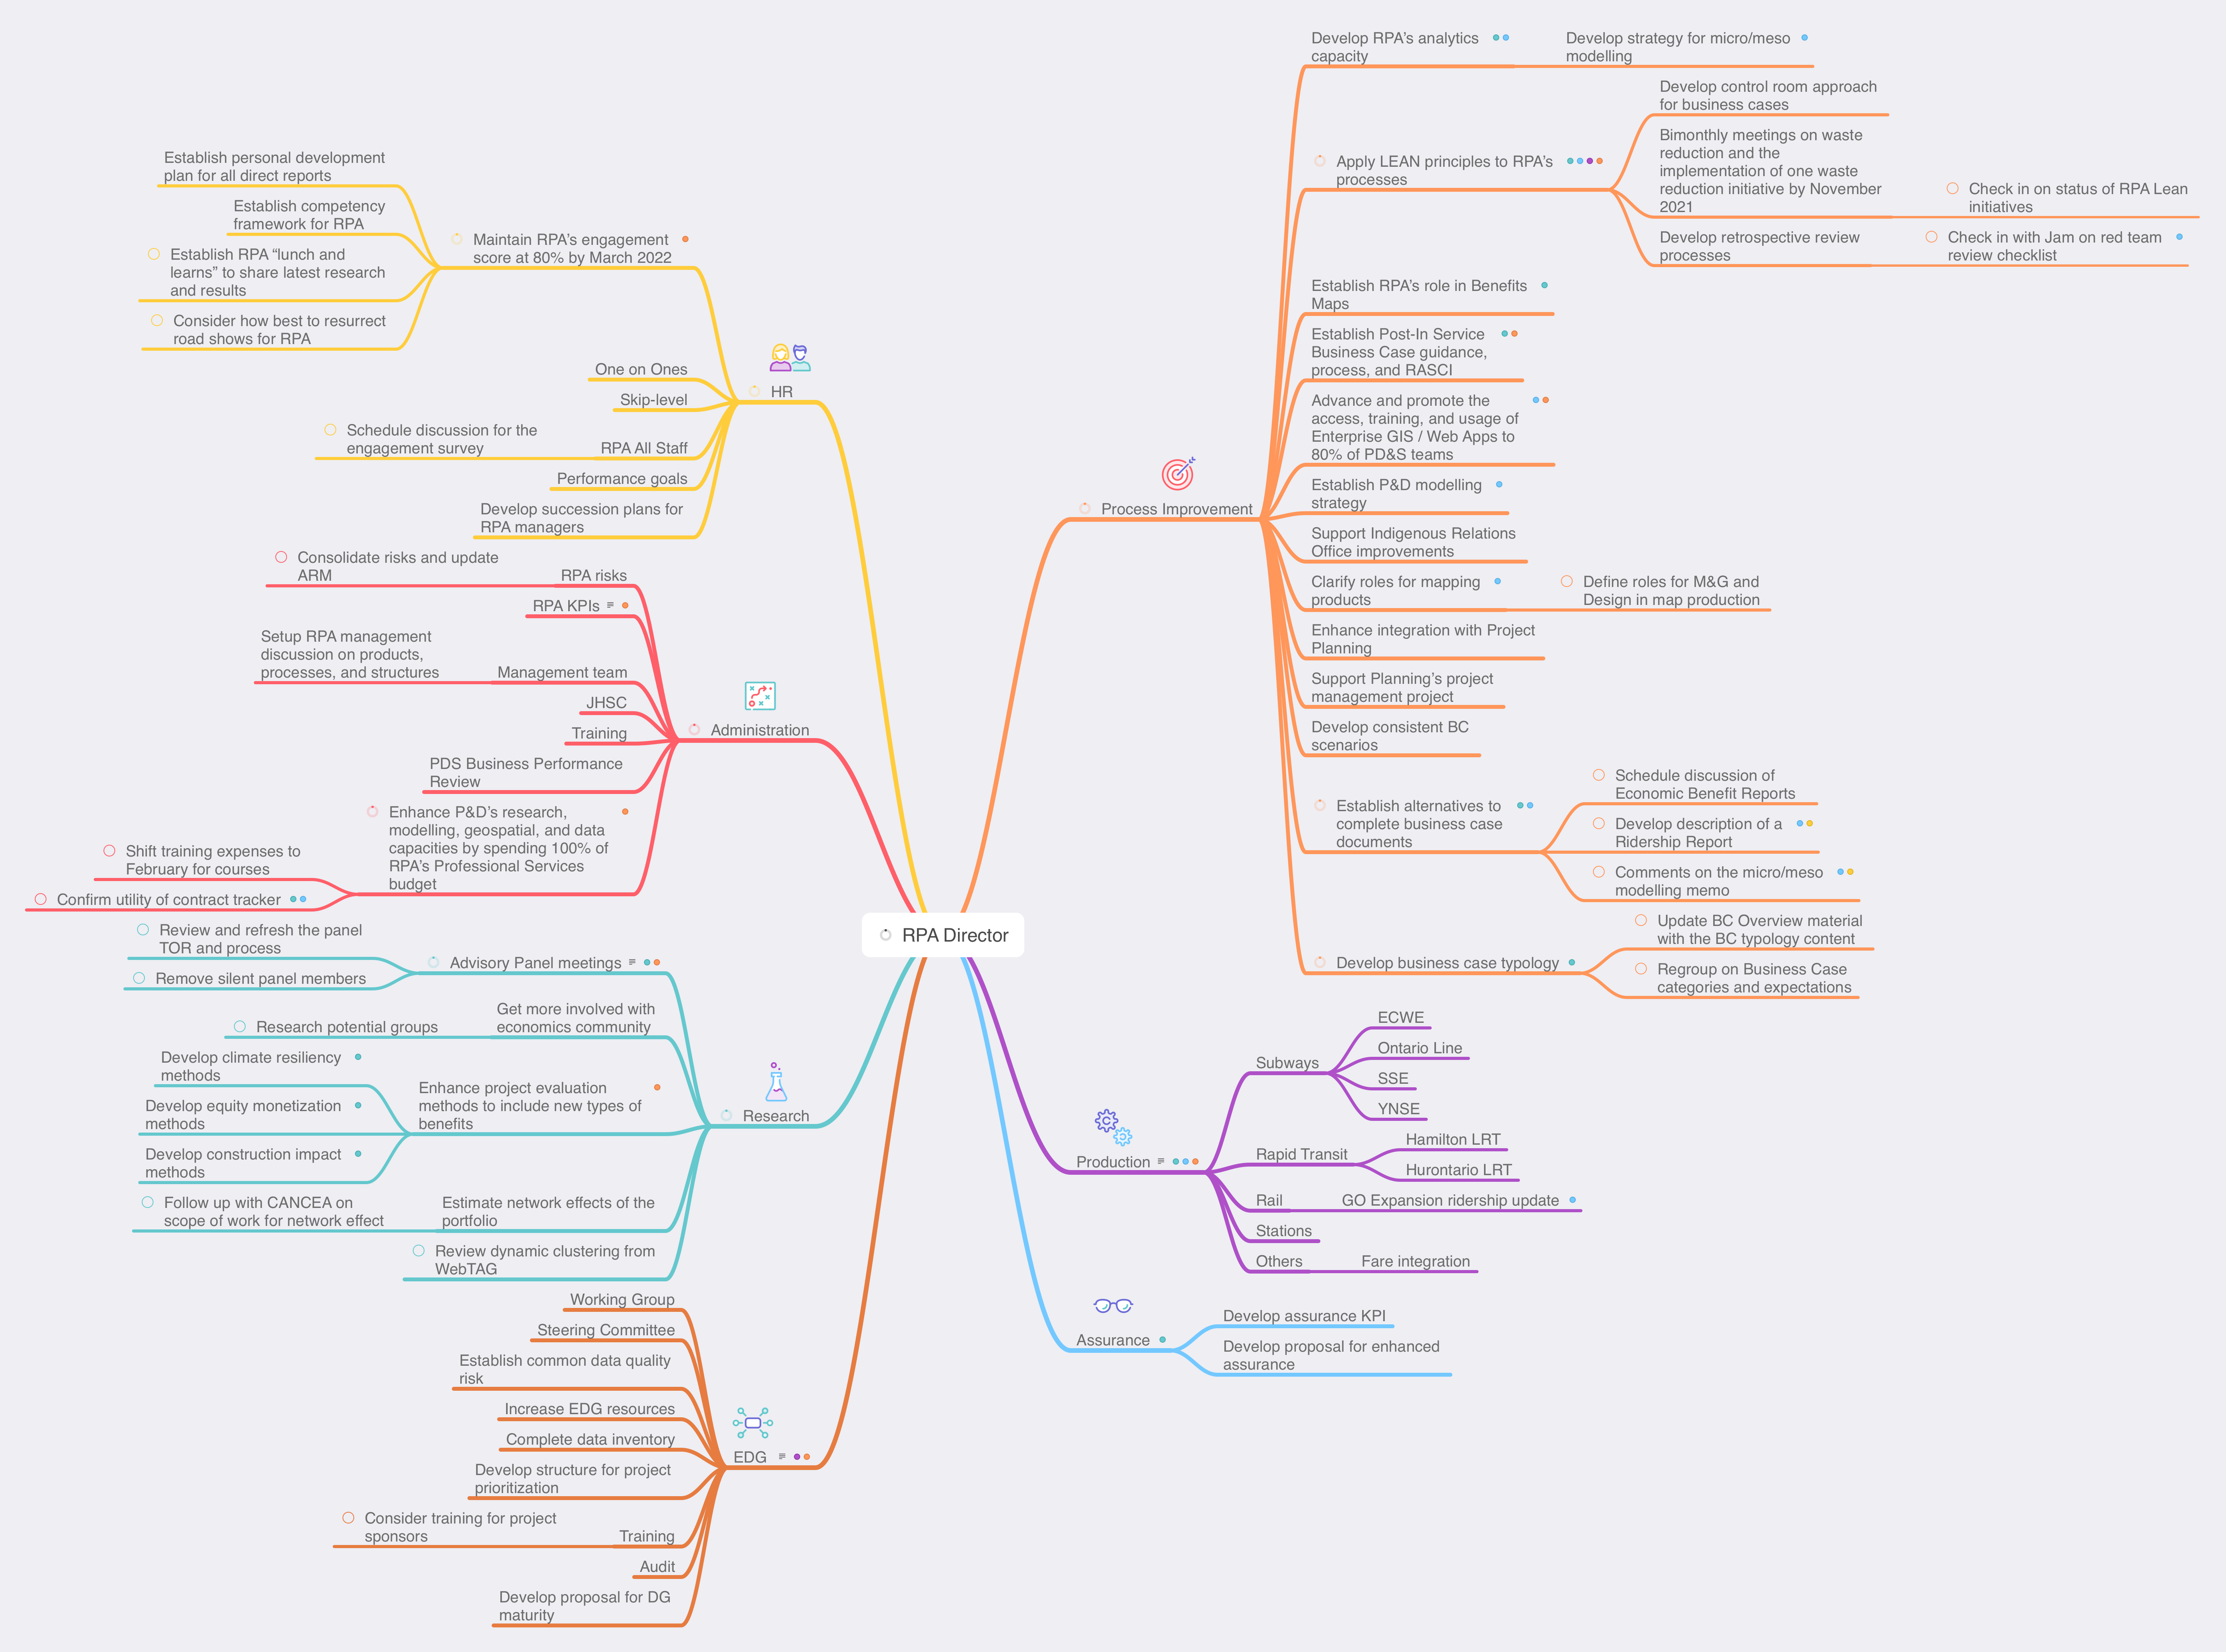 Screenshot of areas of focus and projects as a mindmap in MindNode